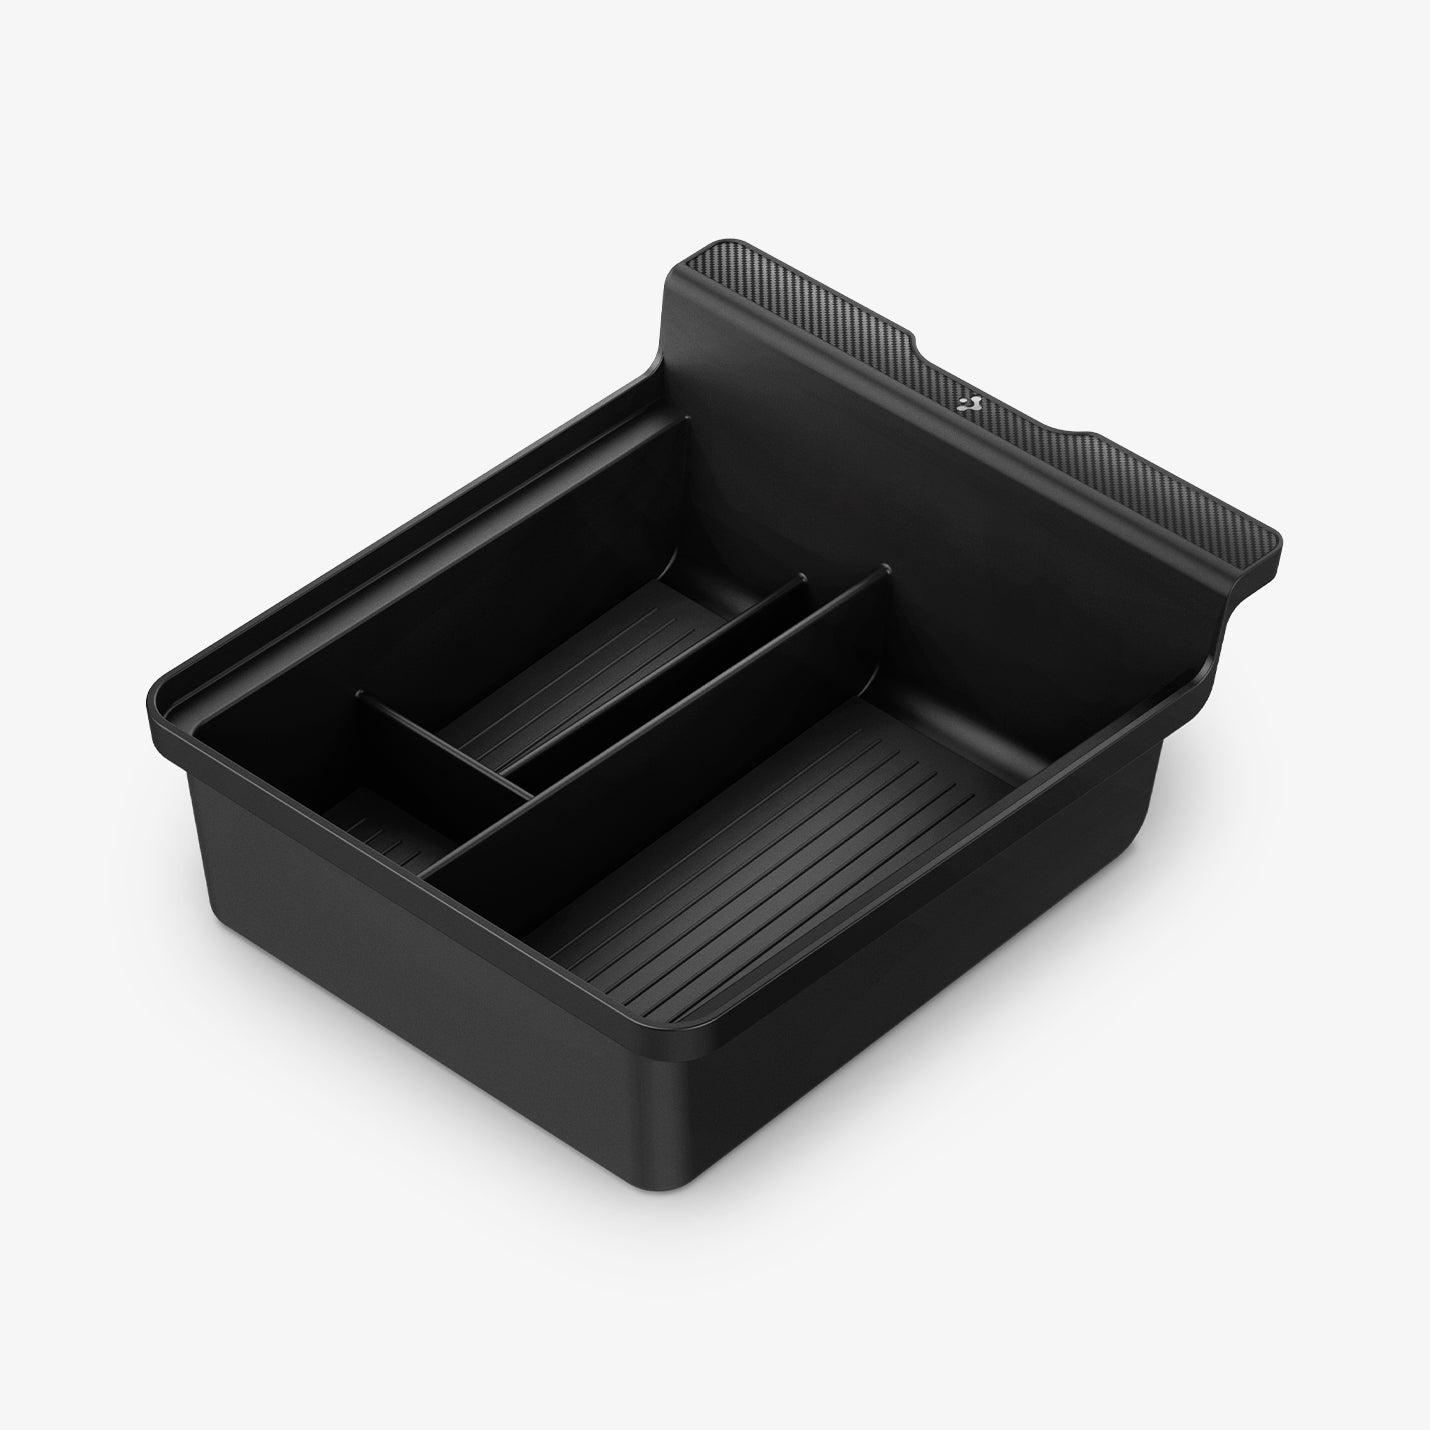  ANKEWAY Tesla Center Console Organizer Tray for Model